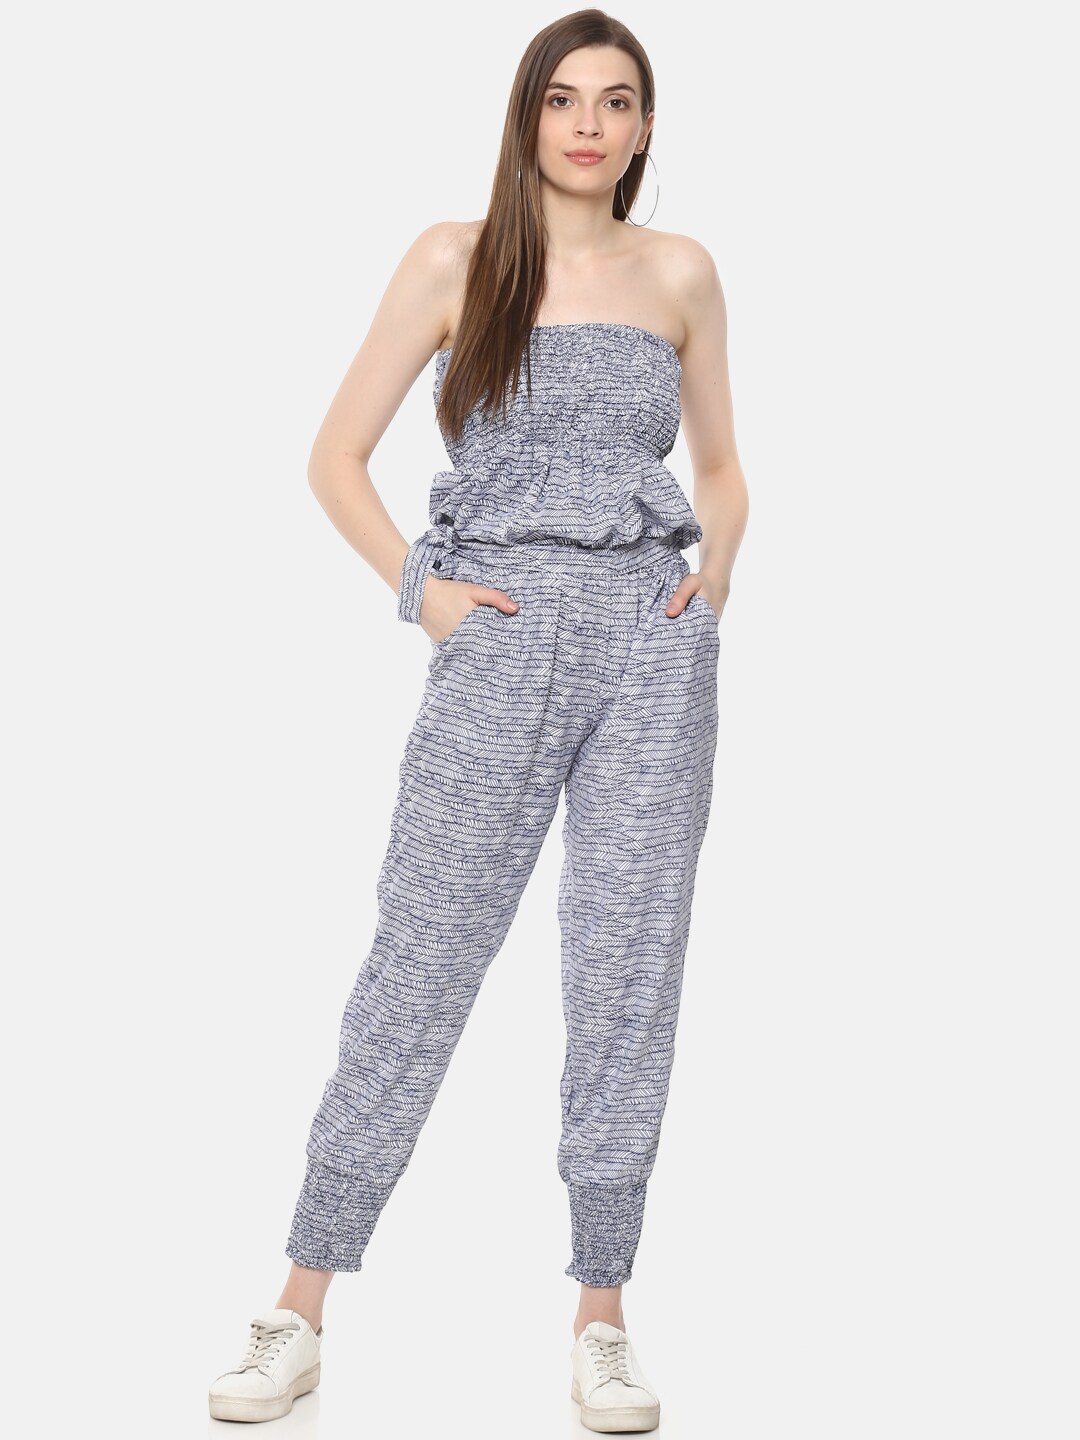 Belle Fille Navy Blue& White  Printed Basic Jumpsuit Price in India